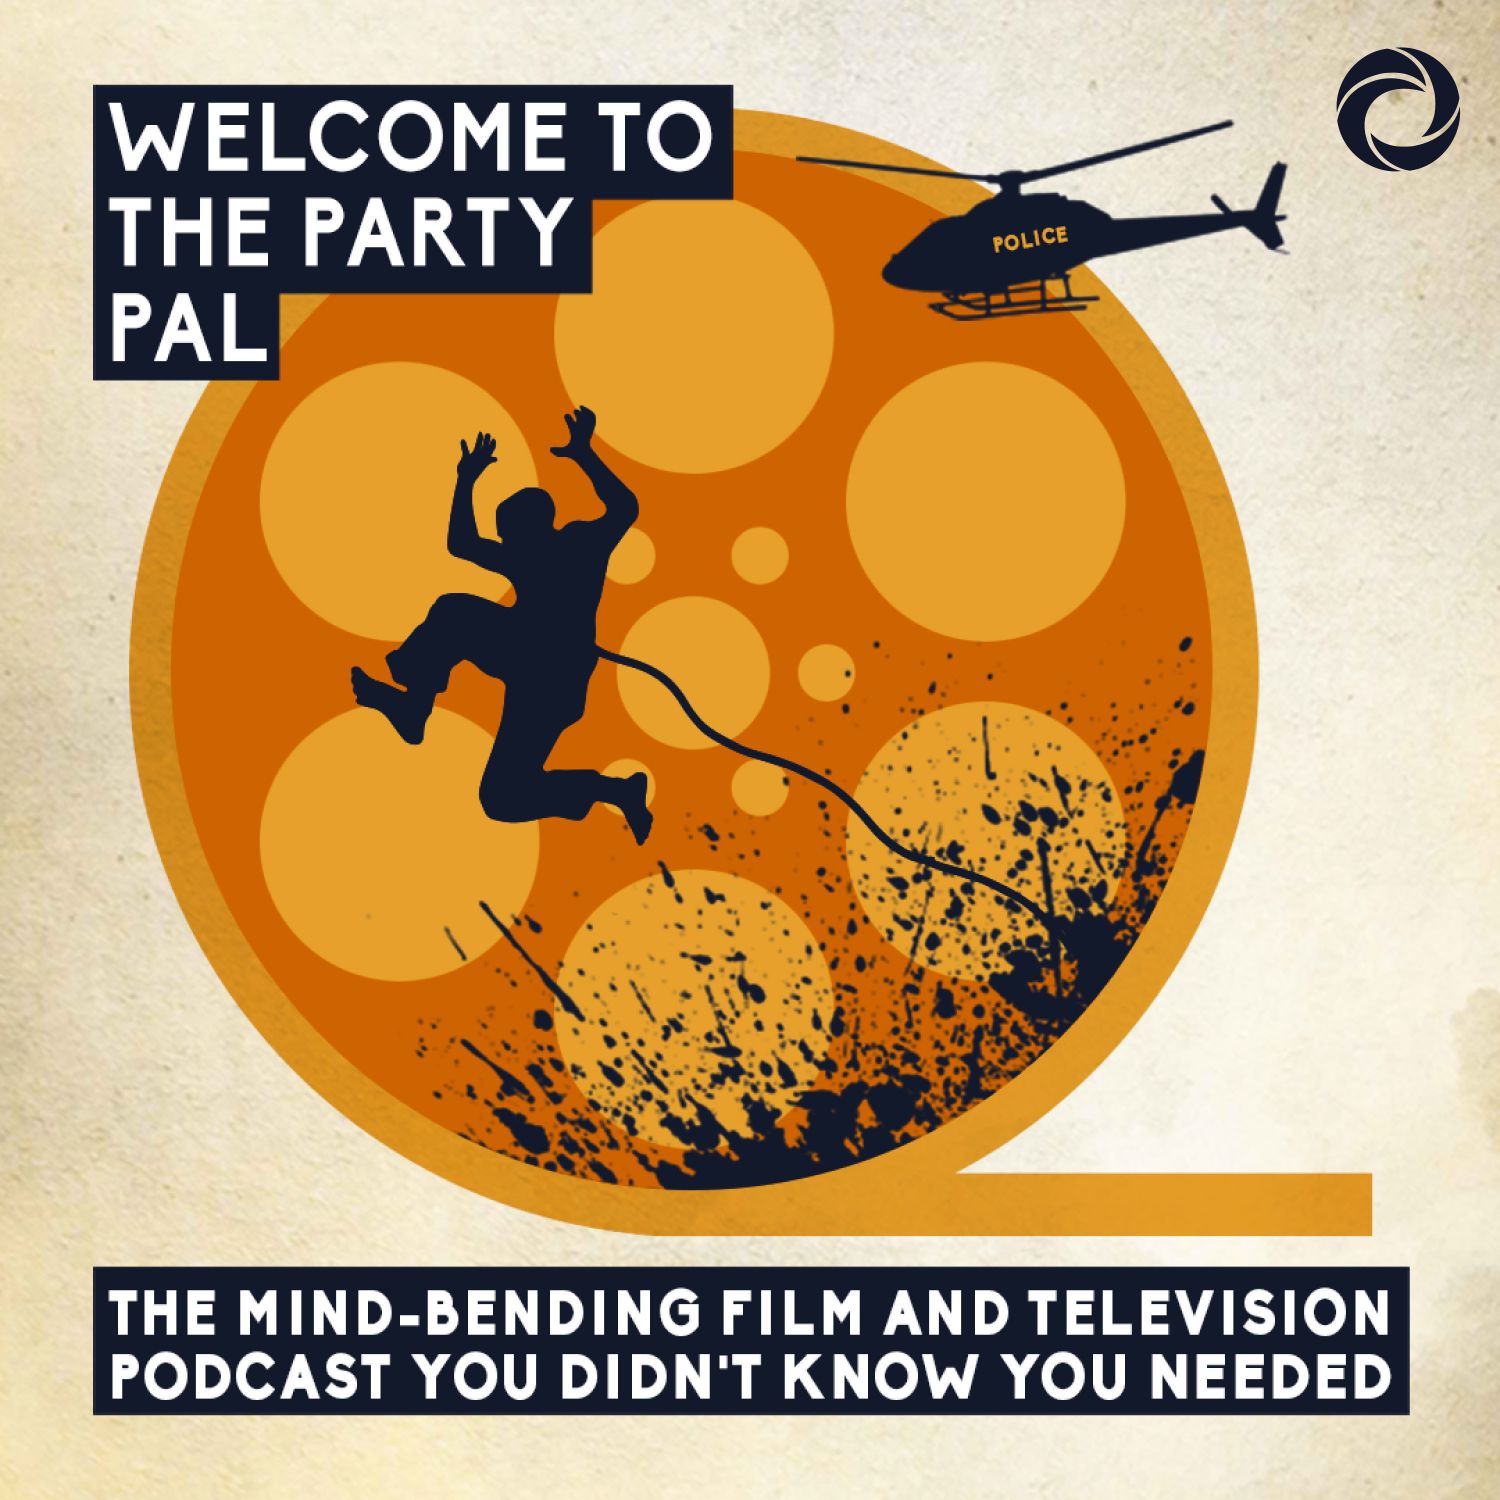 Welcome To The Party Pal: The Mind-Bending Film & Television Podcast You Didn't Know You Needed!